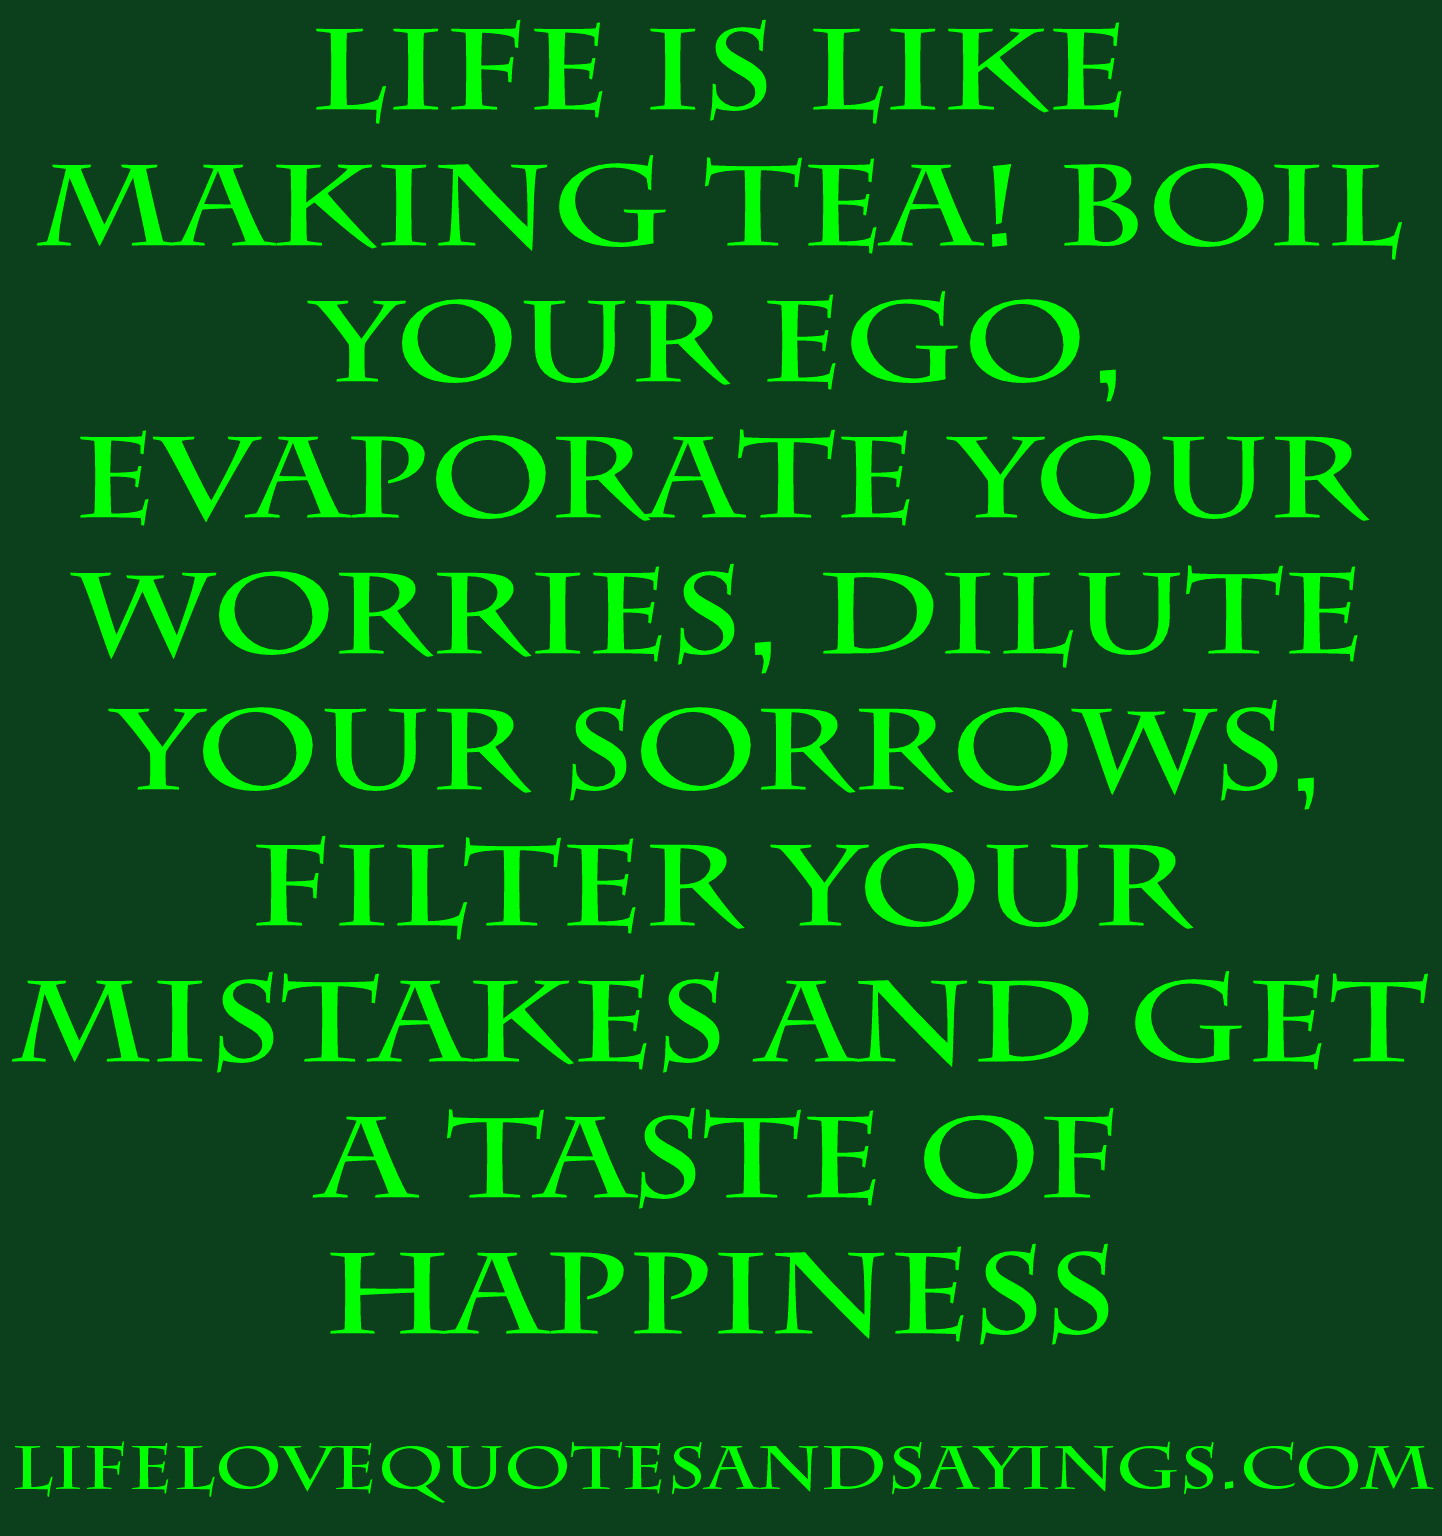 Ego Quotes And Sayings. QuotesGram